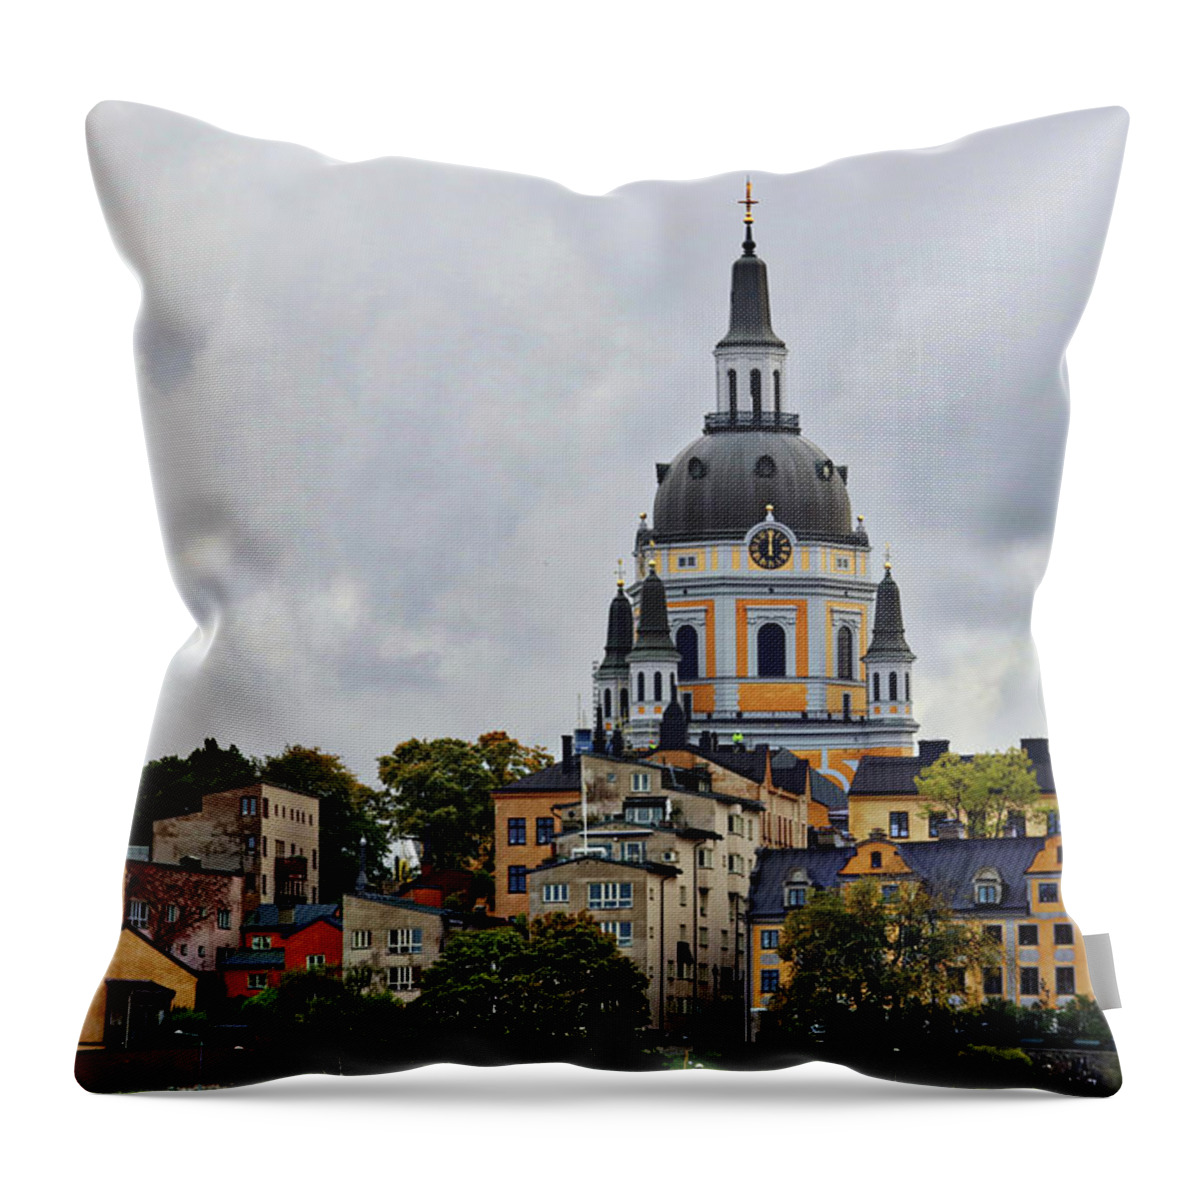 Stockholm Sweden Throw Pillow featuring the photograph Stockholm Sweden #10 by Paul James Bannerman